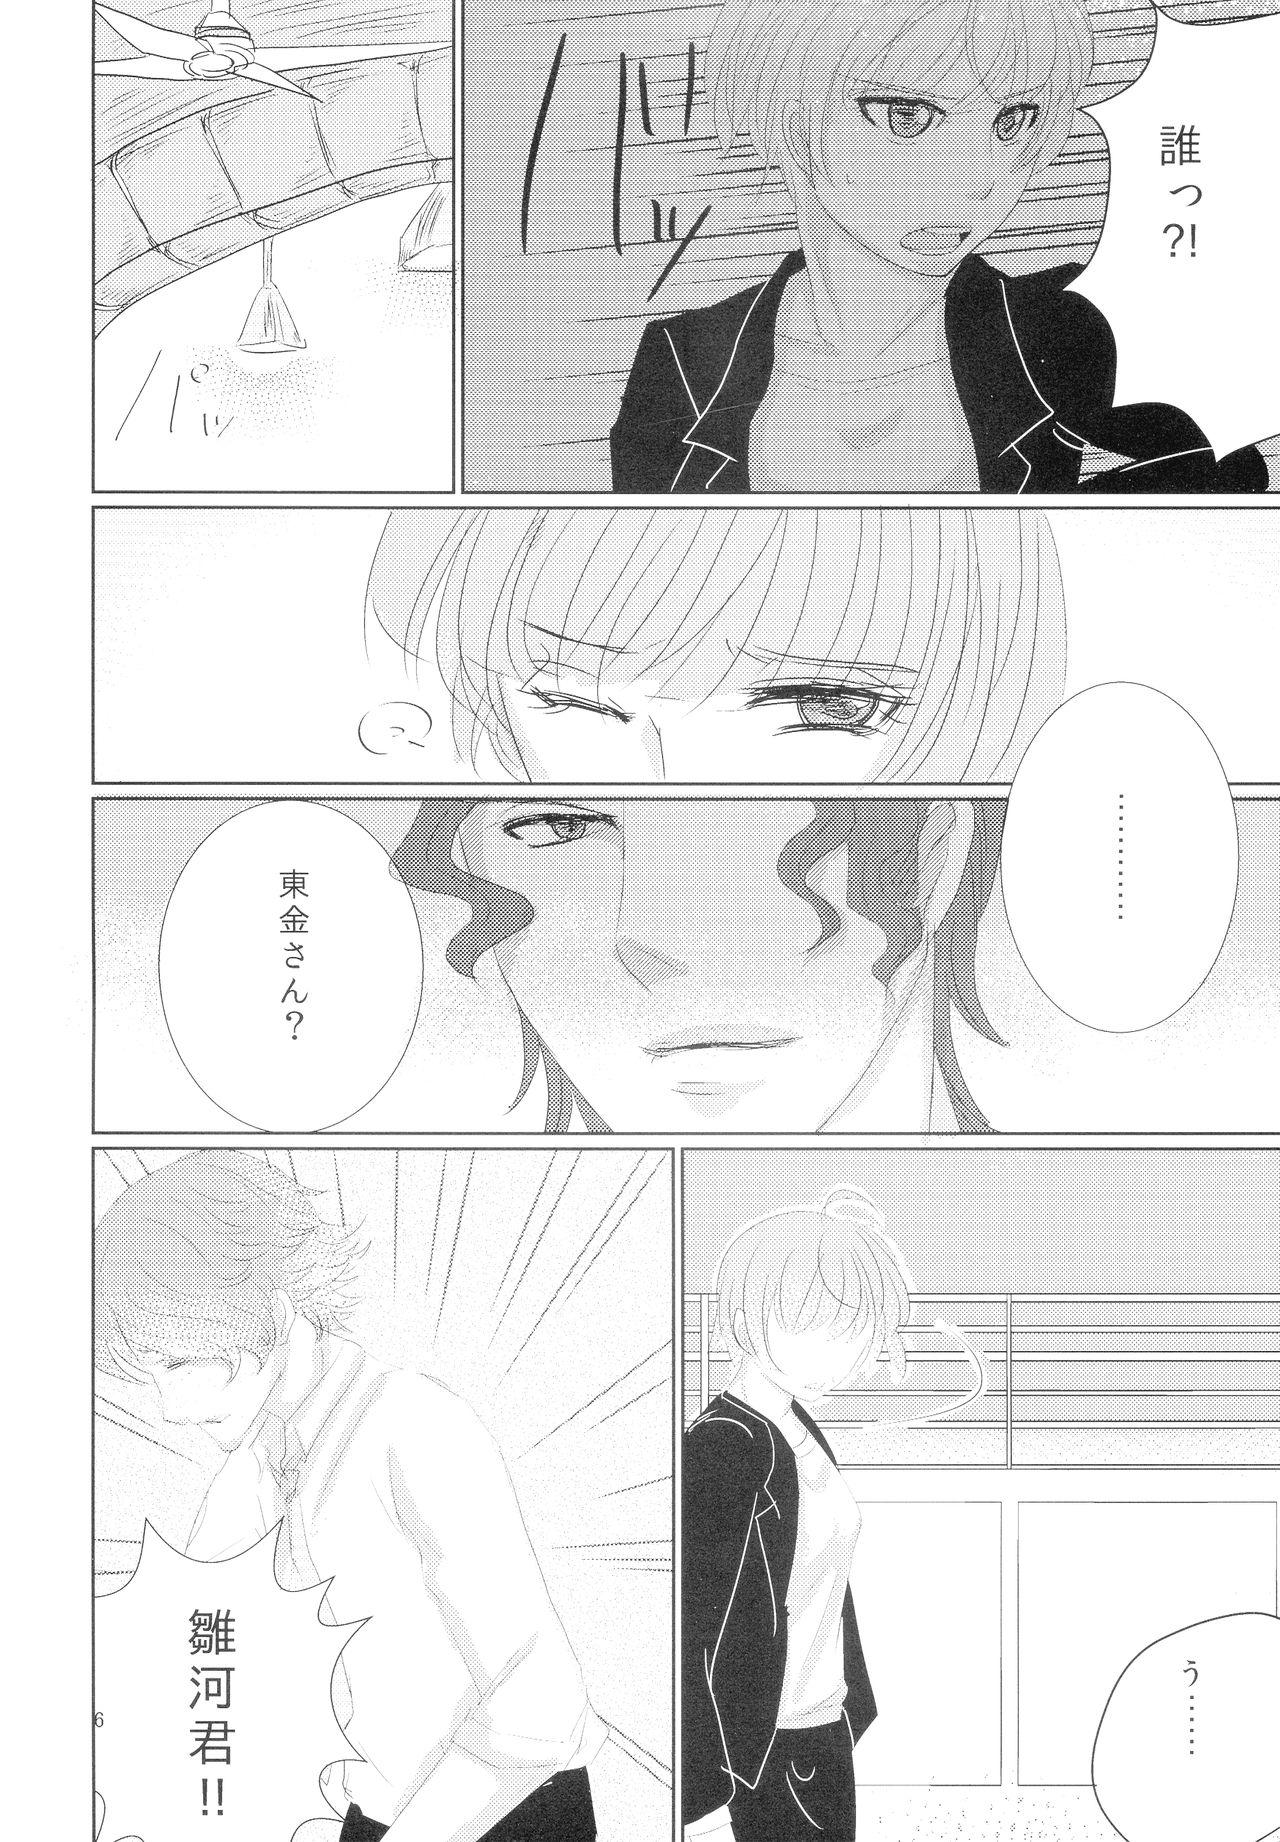 Tinytits CSD - Psycho-pass Stripper - Page 6